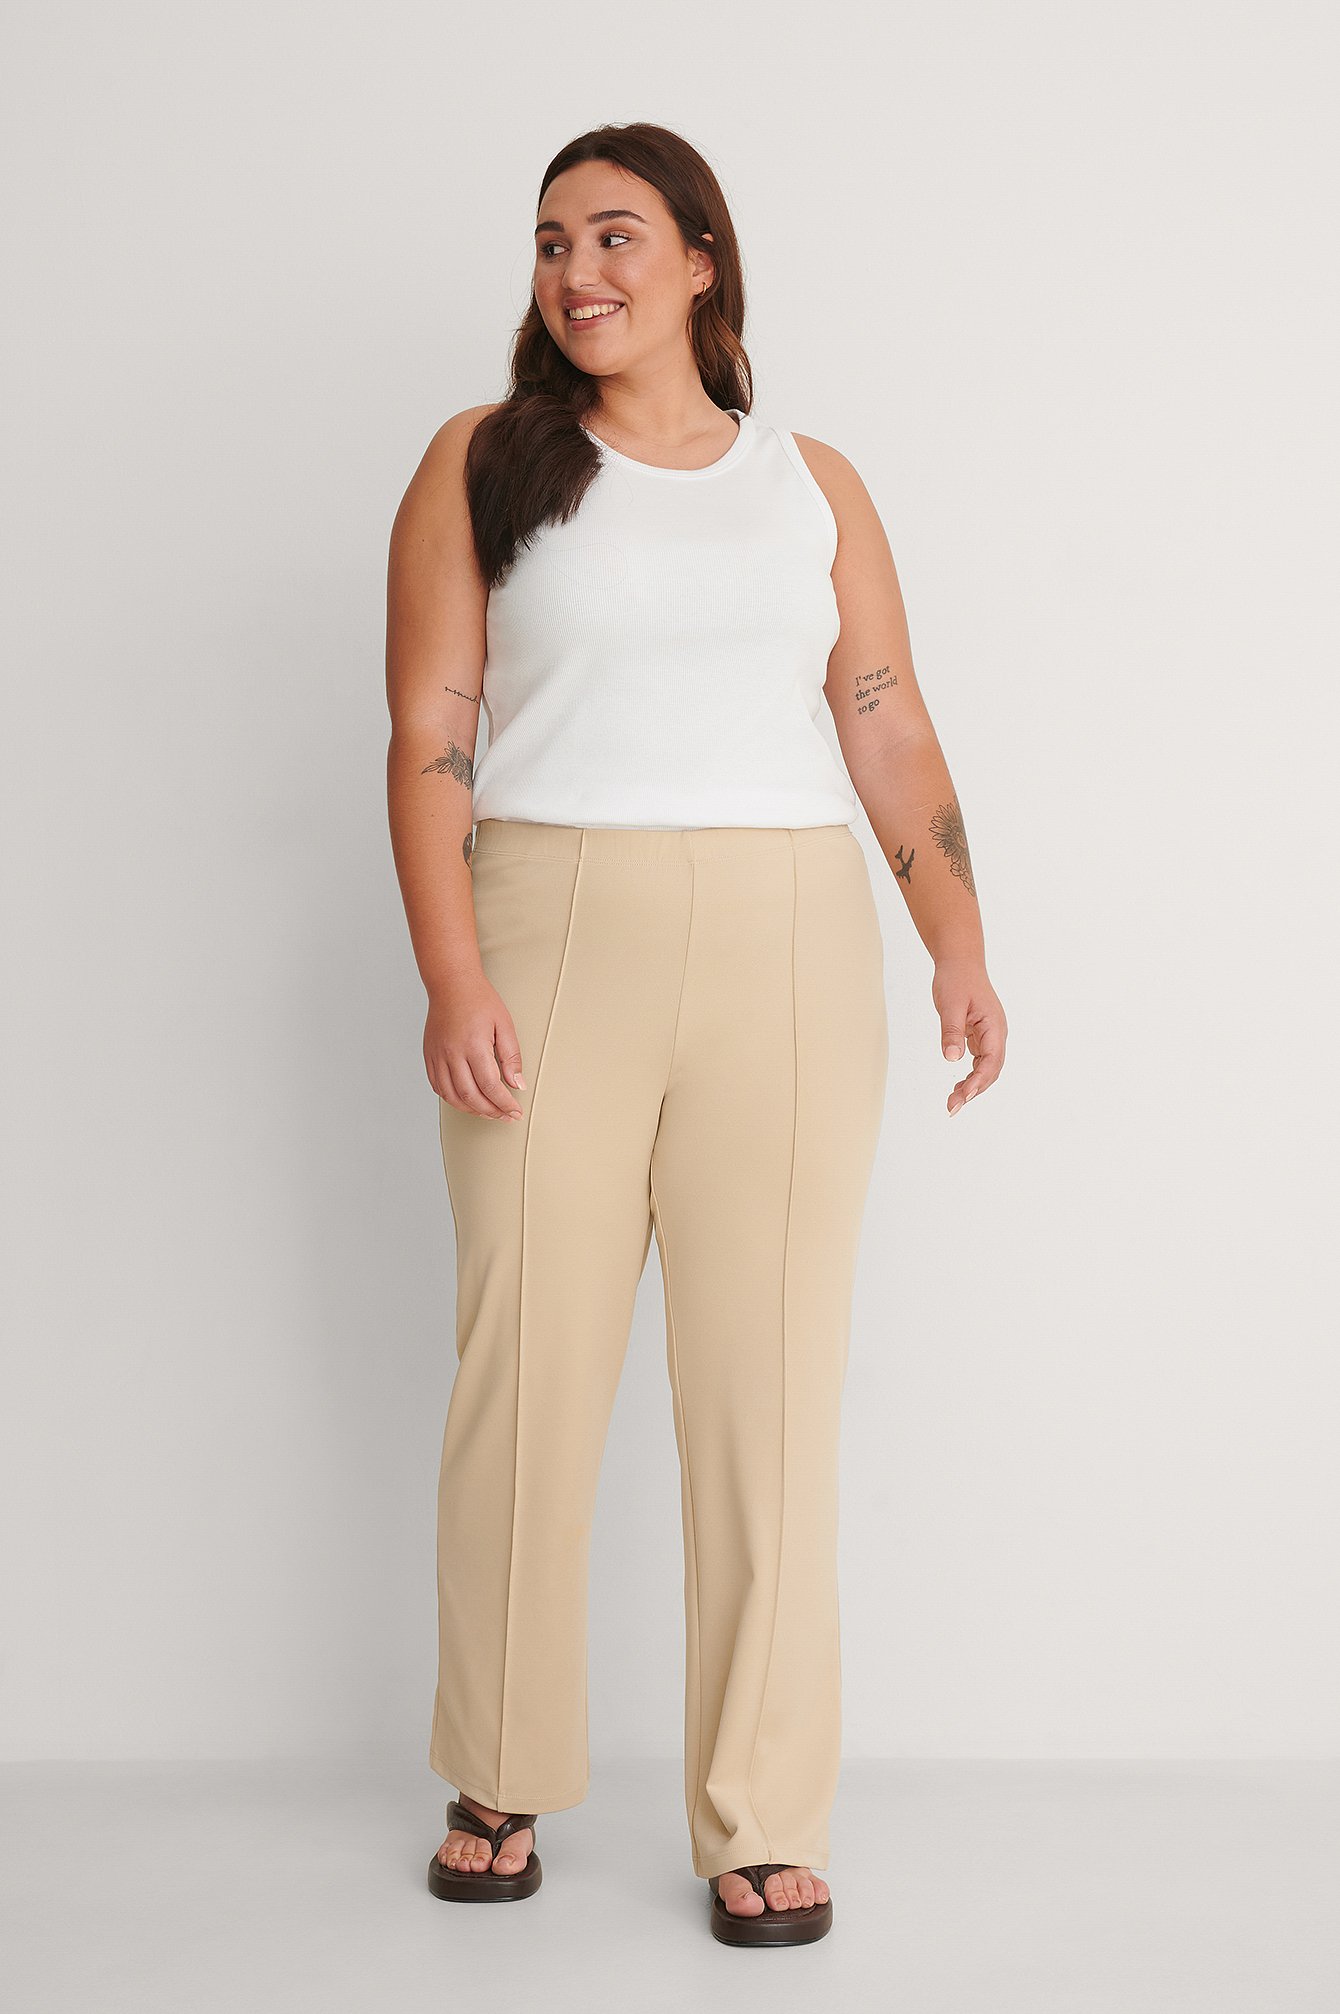 Crepe Seam Detail Pants Outfit